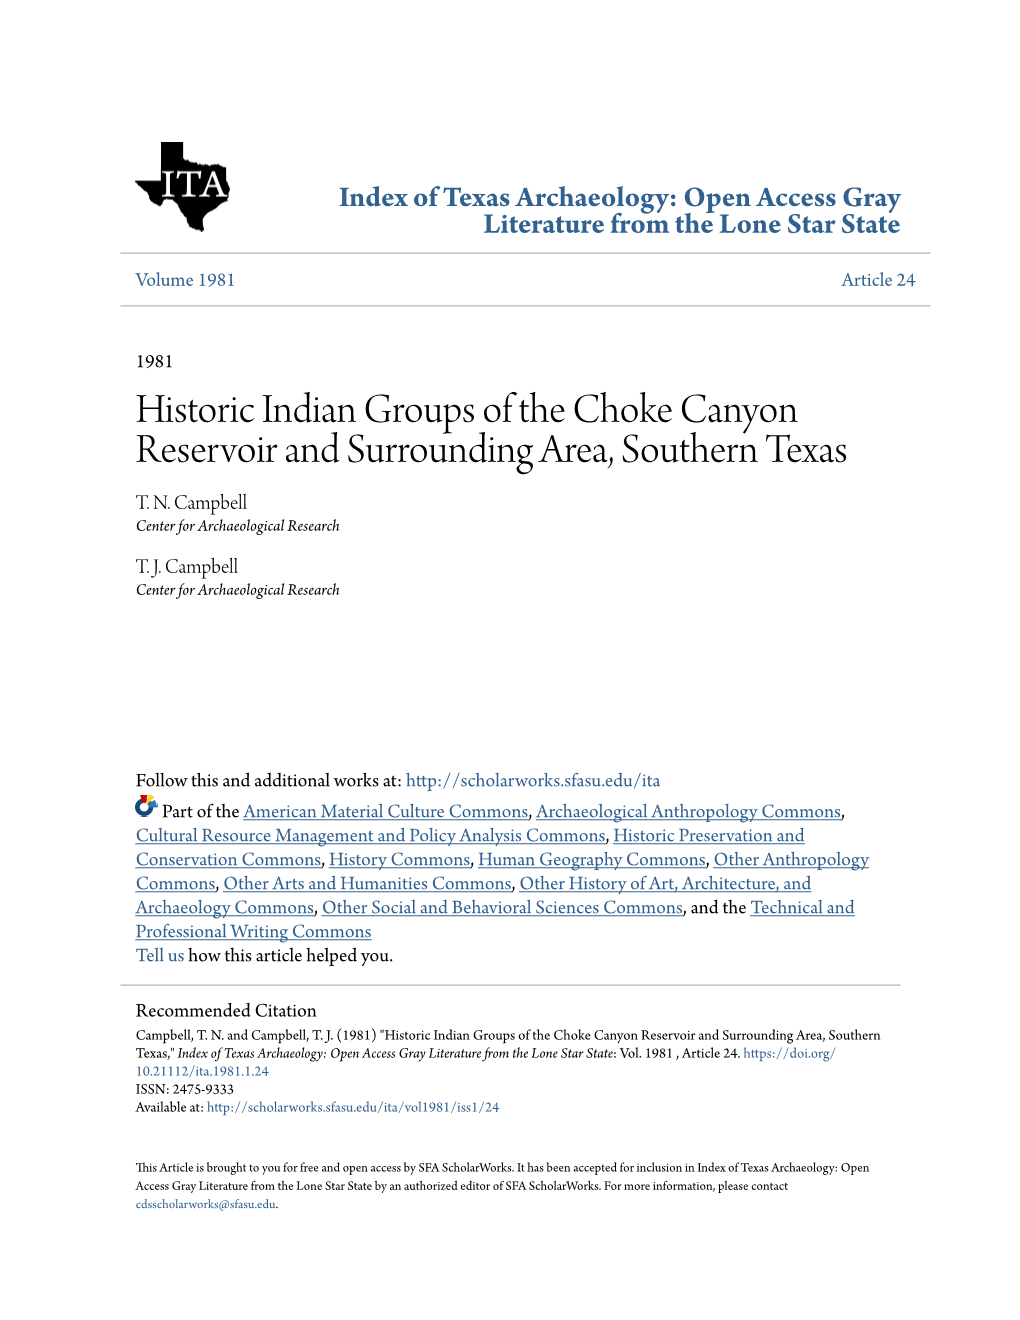 Historic Indian Groups of the Choke Canyon Reservoir and Surrounding Area, Southern Texas T